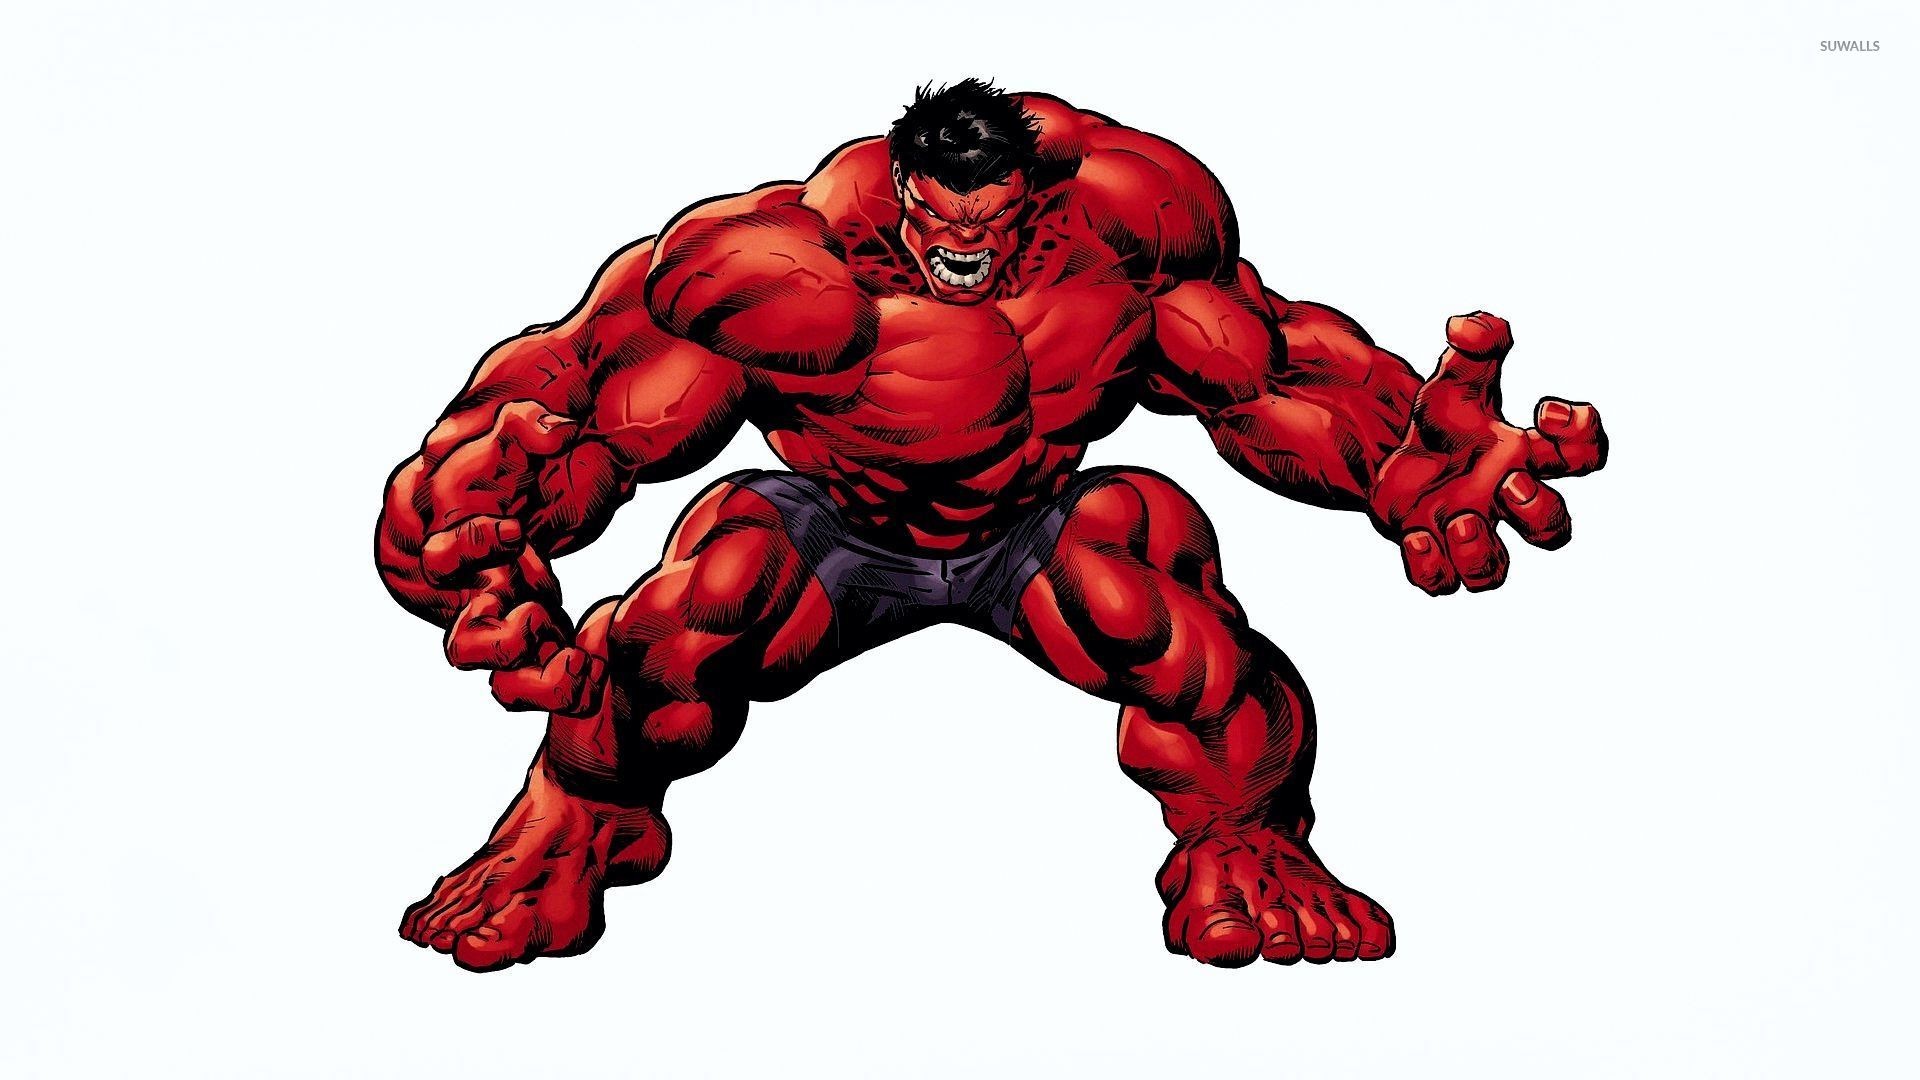 1920x1080 Angry Red Hulk wallpaper